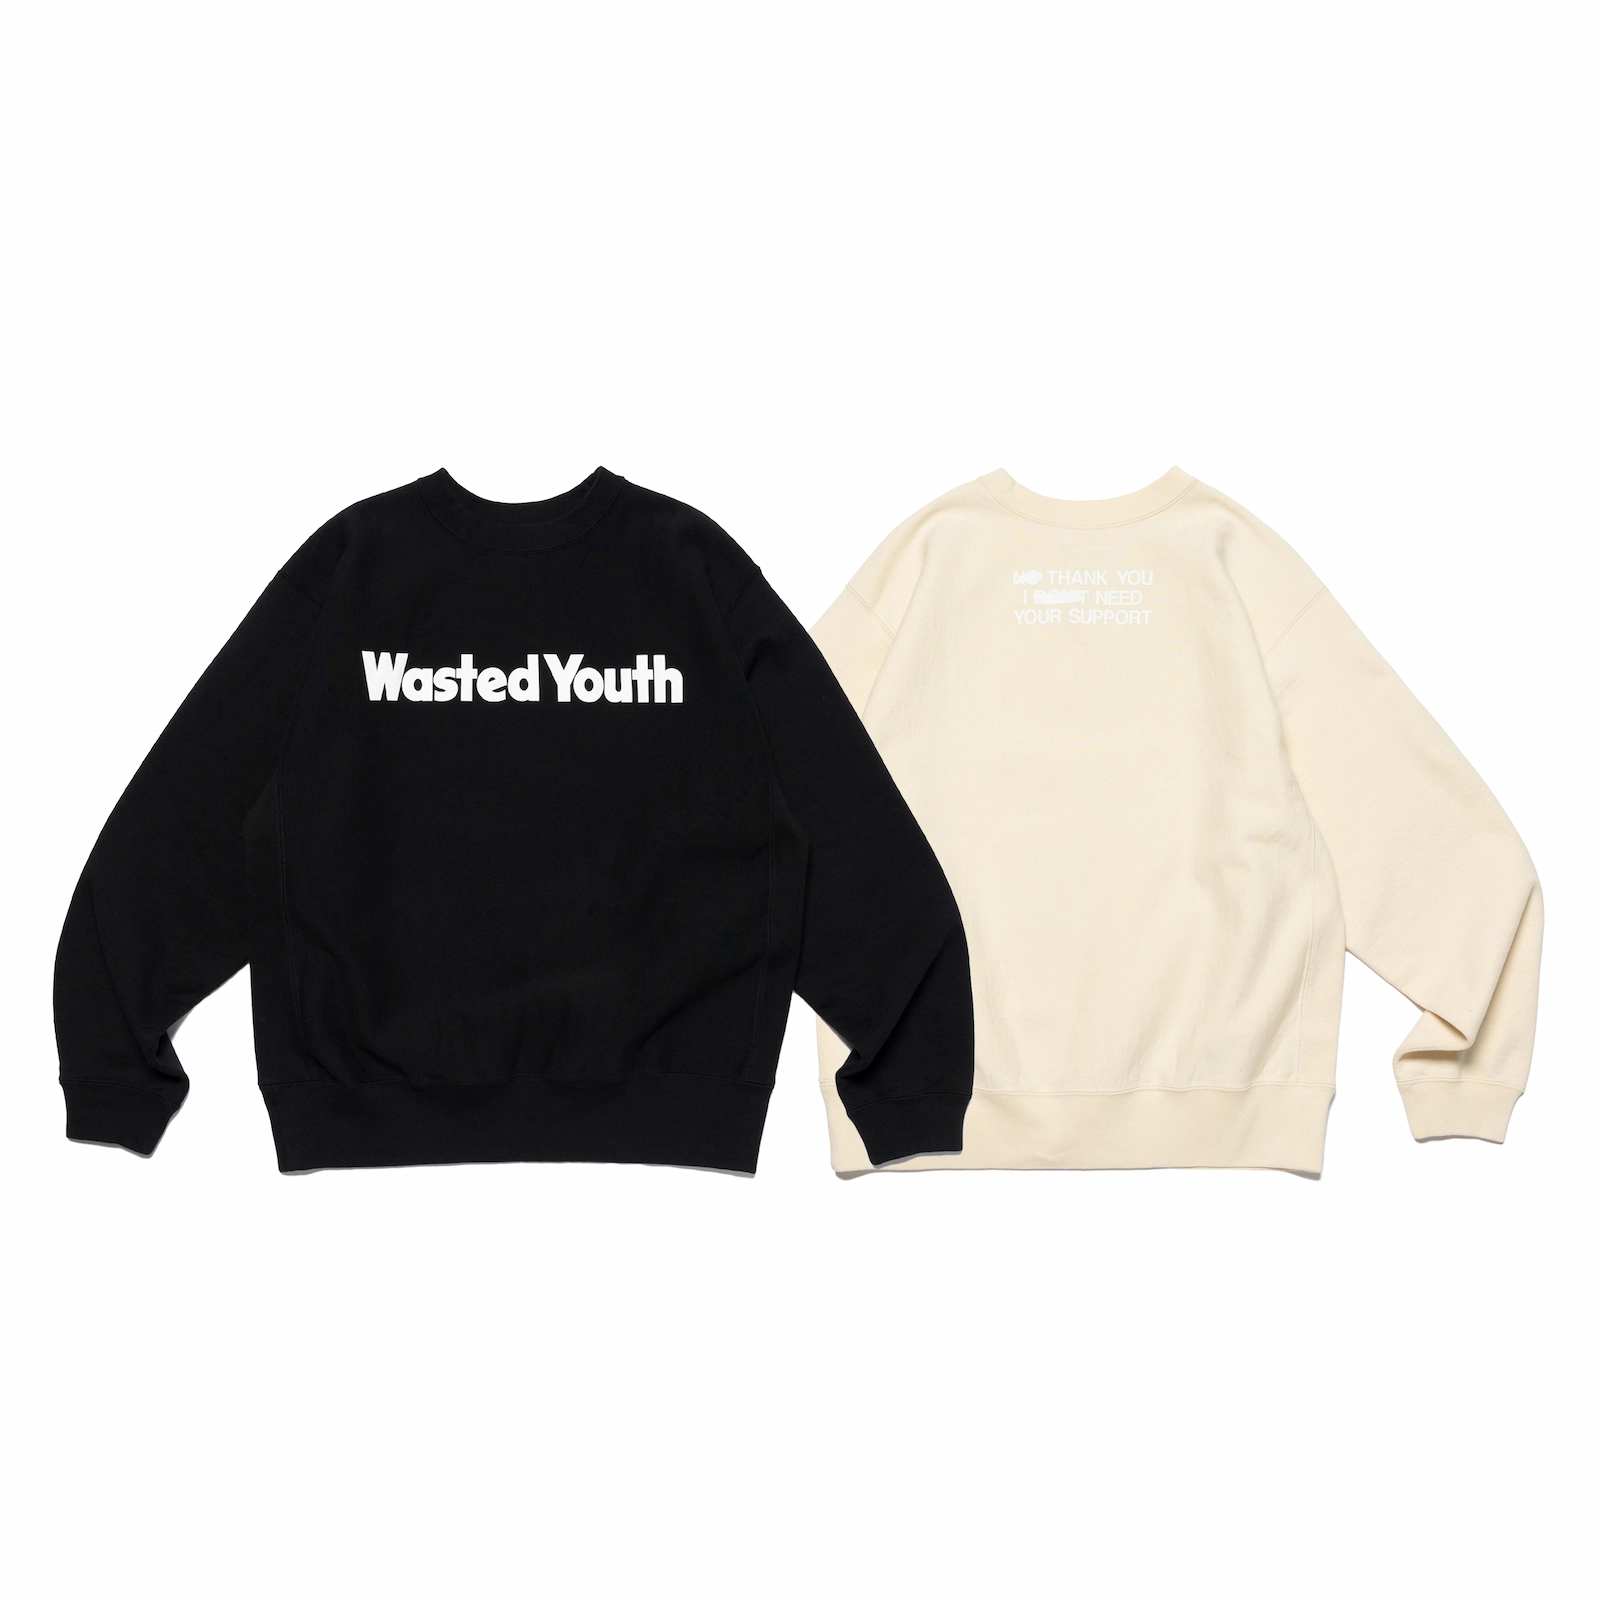 Wasted Youth Season 1 Collection | HUMAN MADE Inc.